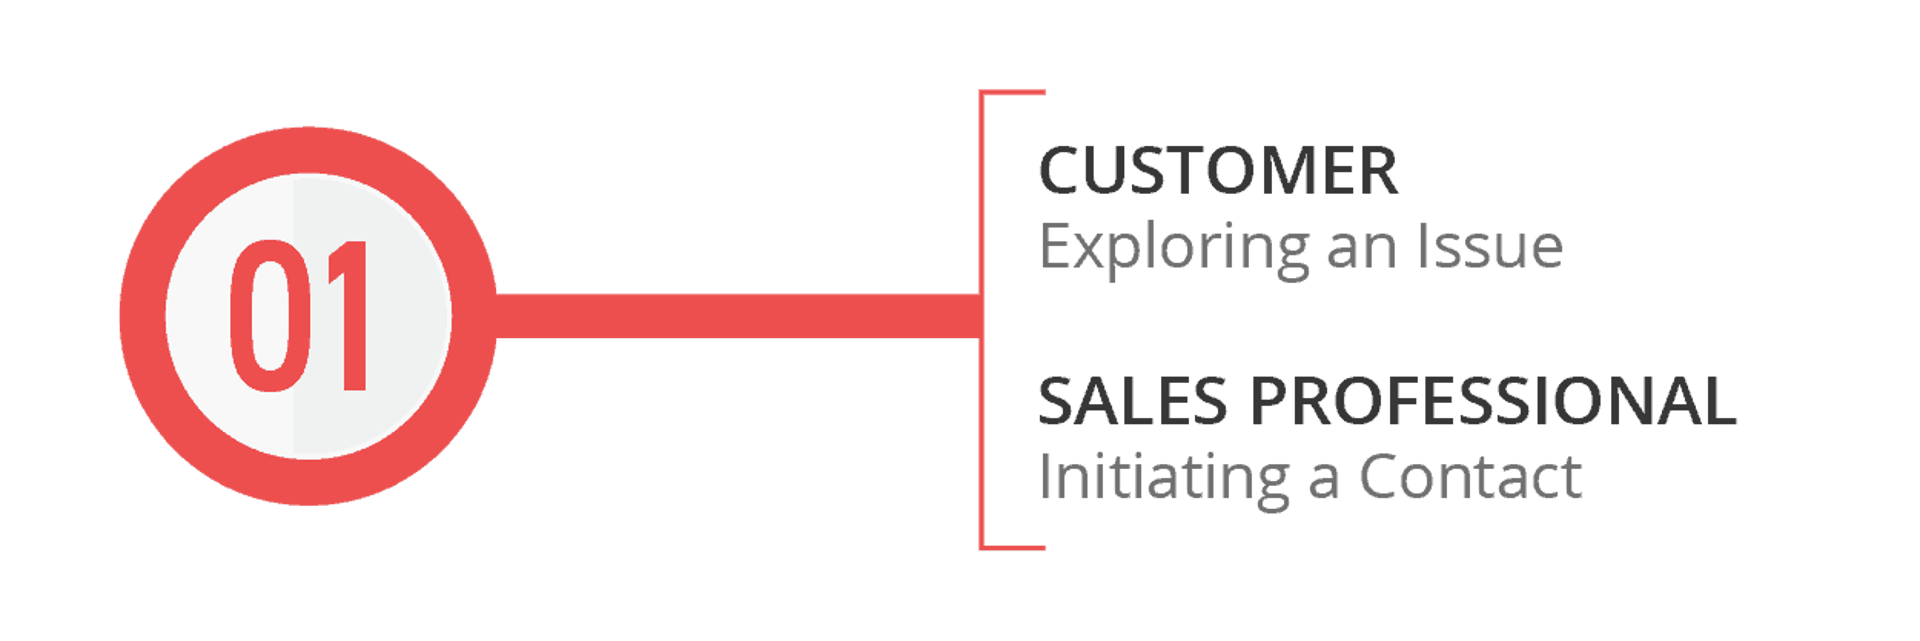 sales cycle & buyer journey step 1